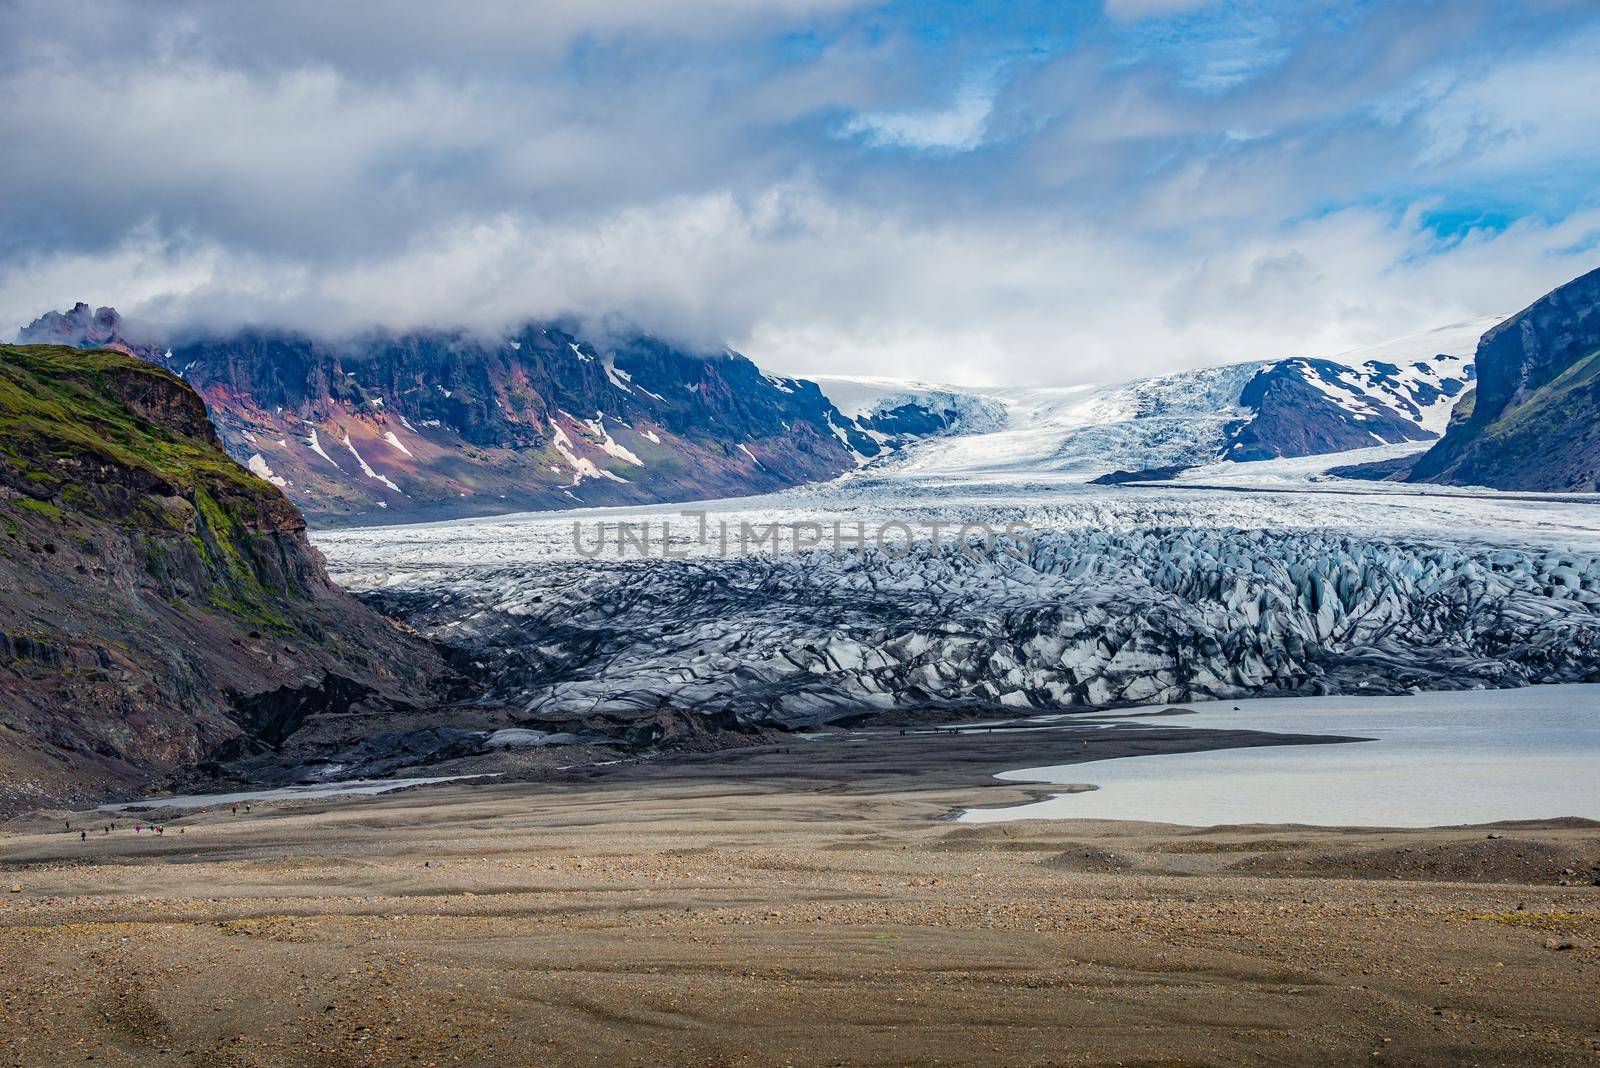 Panoramic view over Skaftafellsjokull glacier and tourists, a wander near Skaftafell on South Iceland